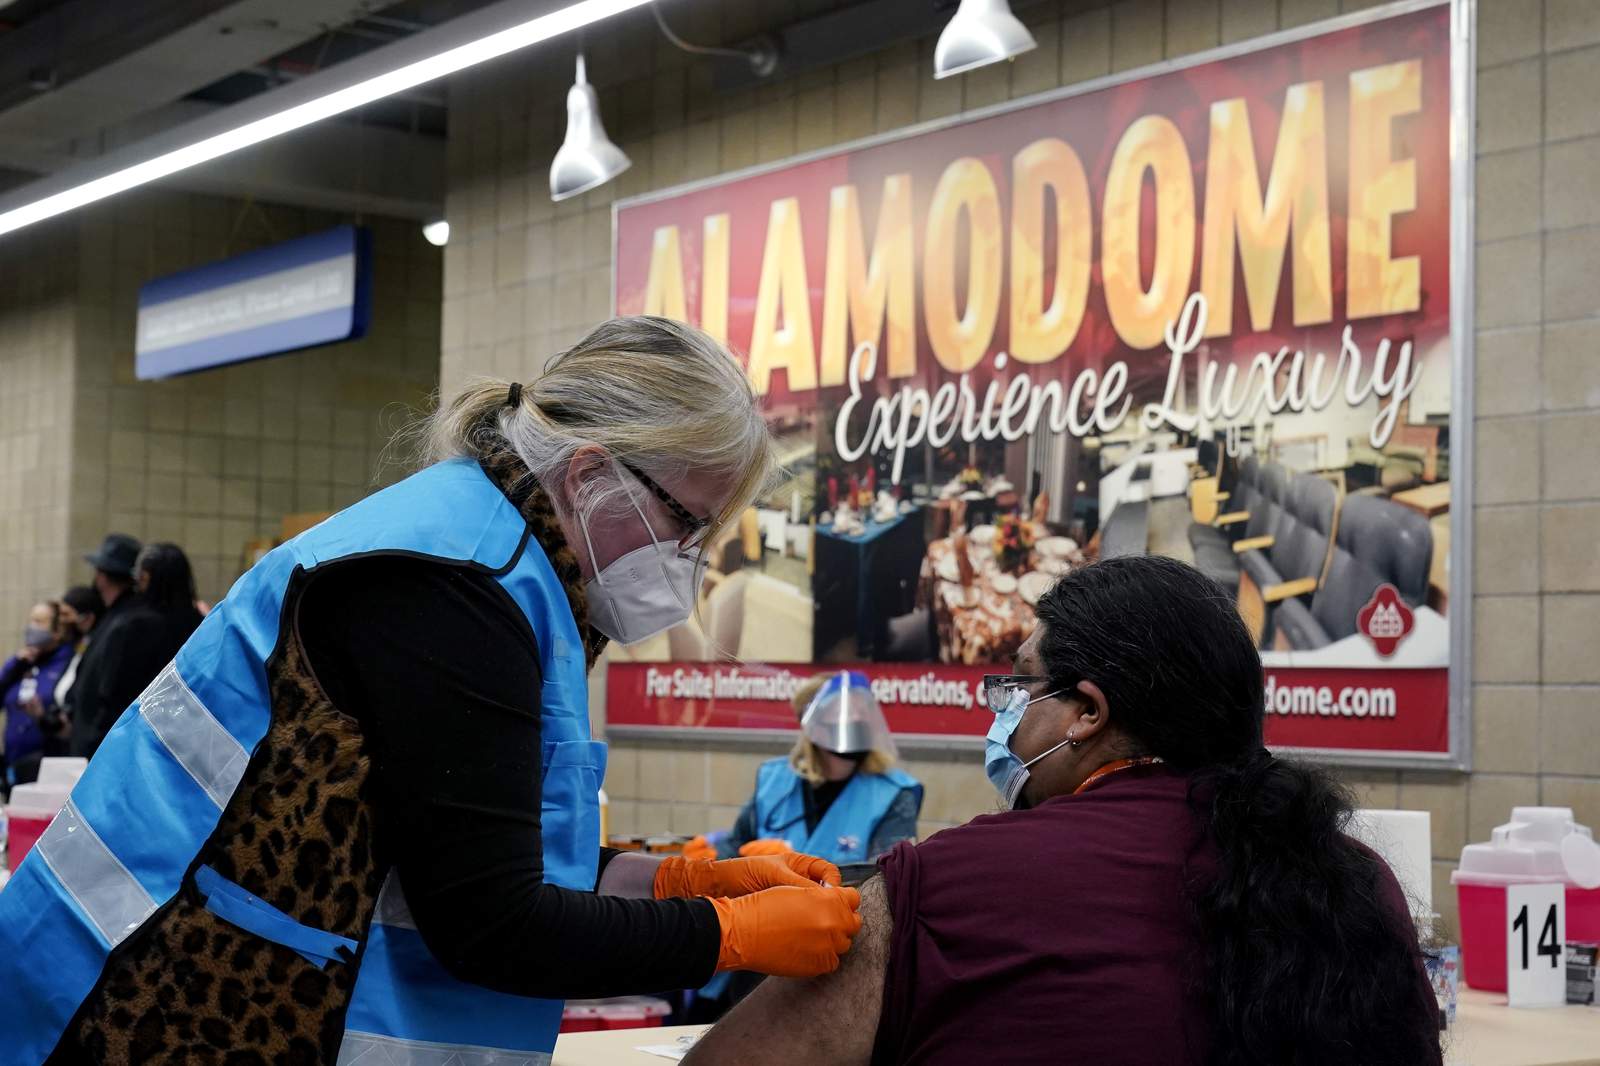 The second dose of COVID-19 vaccinations is scheduled for this week at Alamodome